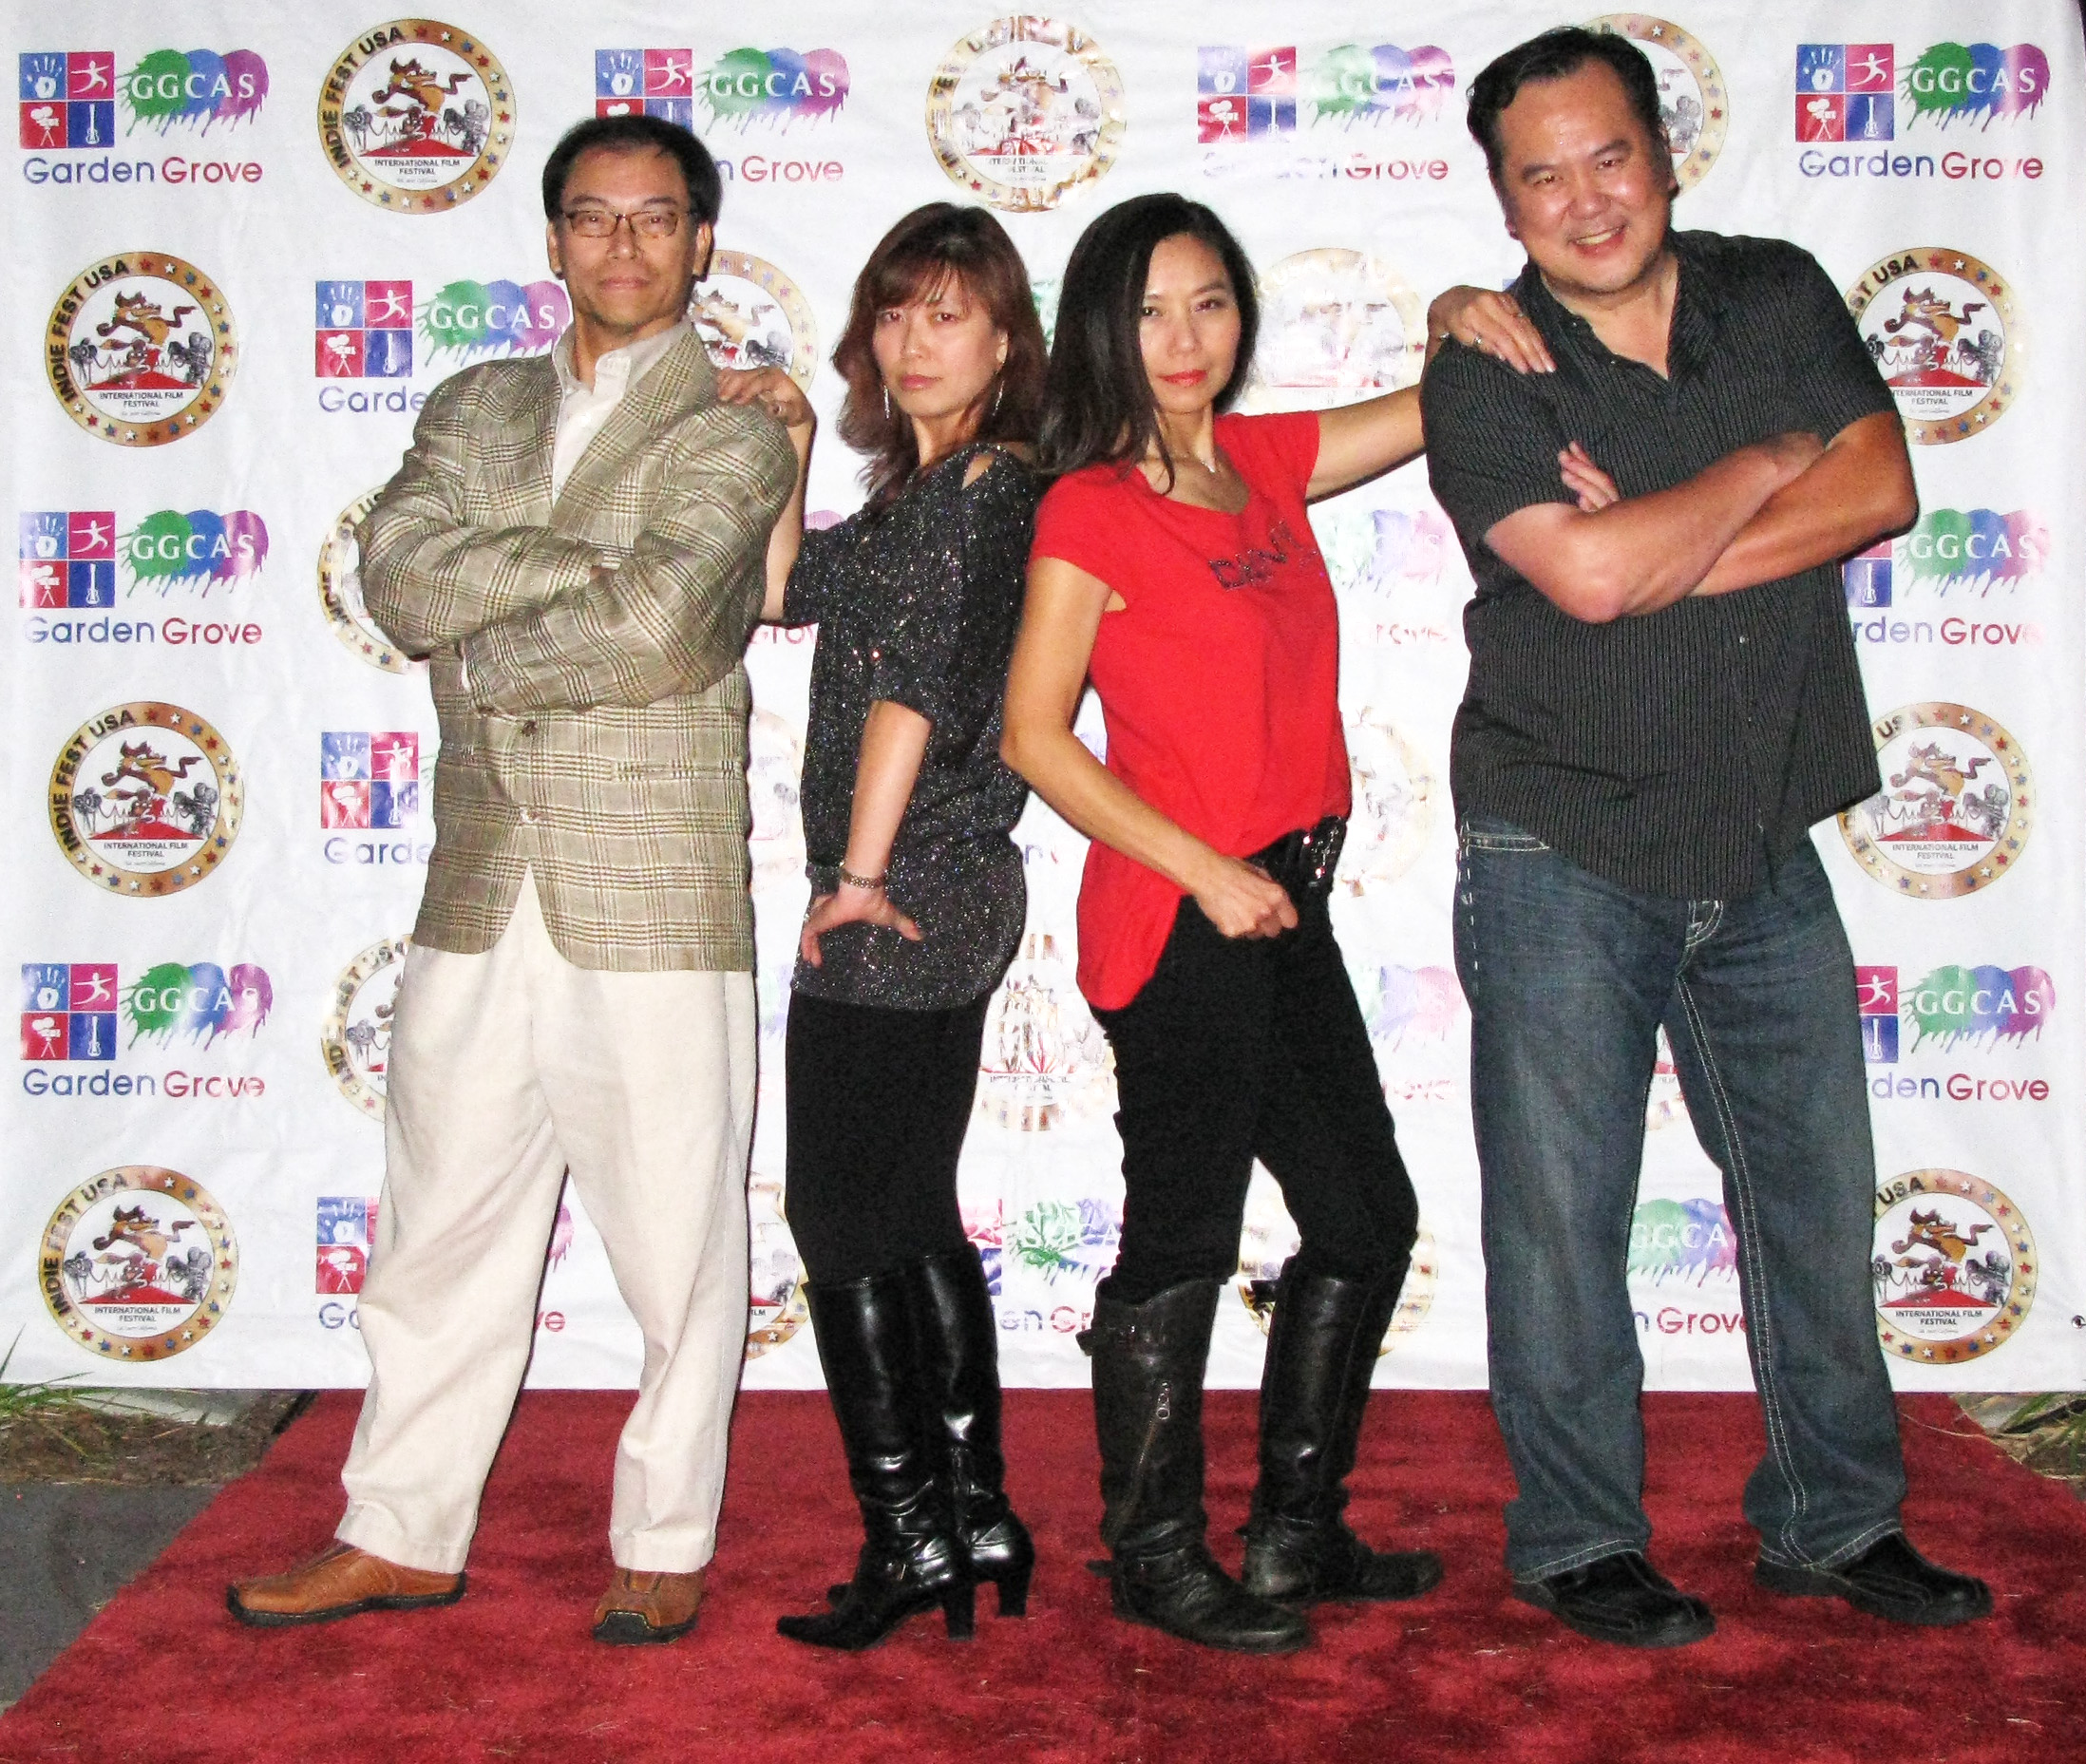 at the Indie Fest USA International Film Festival 2014